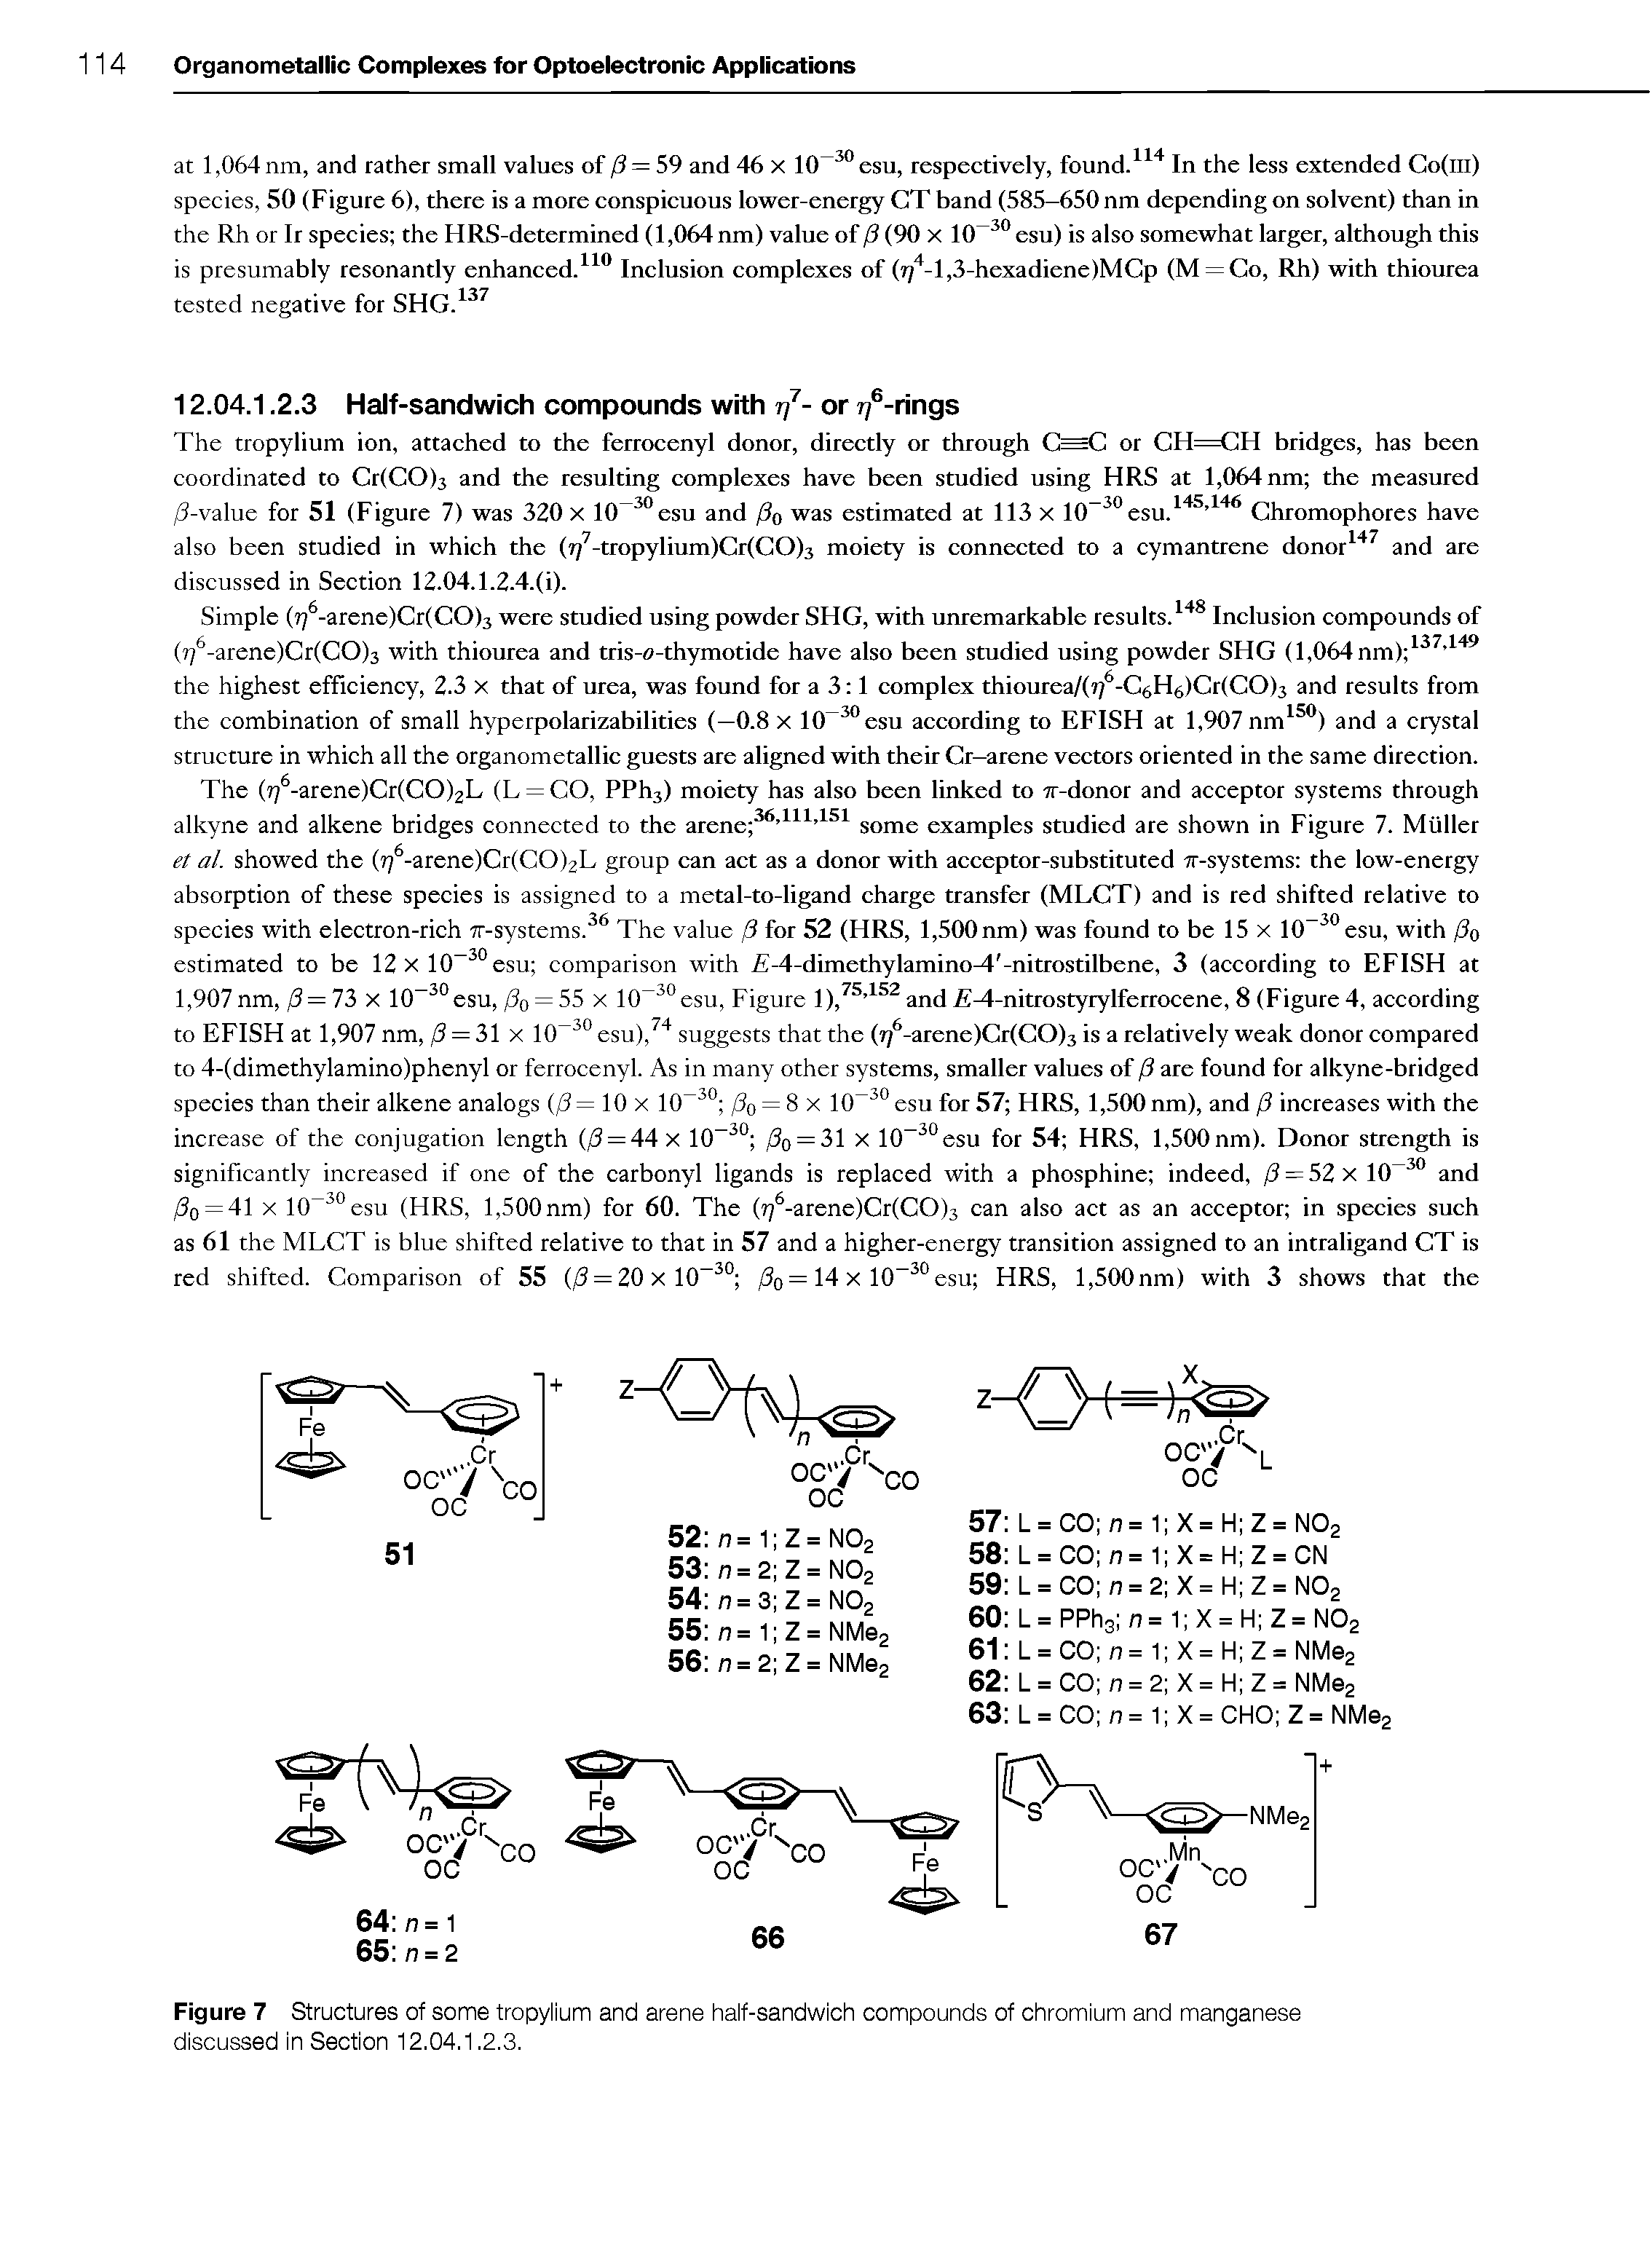 Figure 7 Structures of some tropylium and arene half-sandwich compounds of chromium and manganese disoussed in Section 12.04.1.2.3.